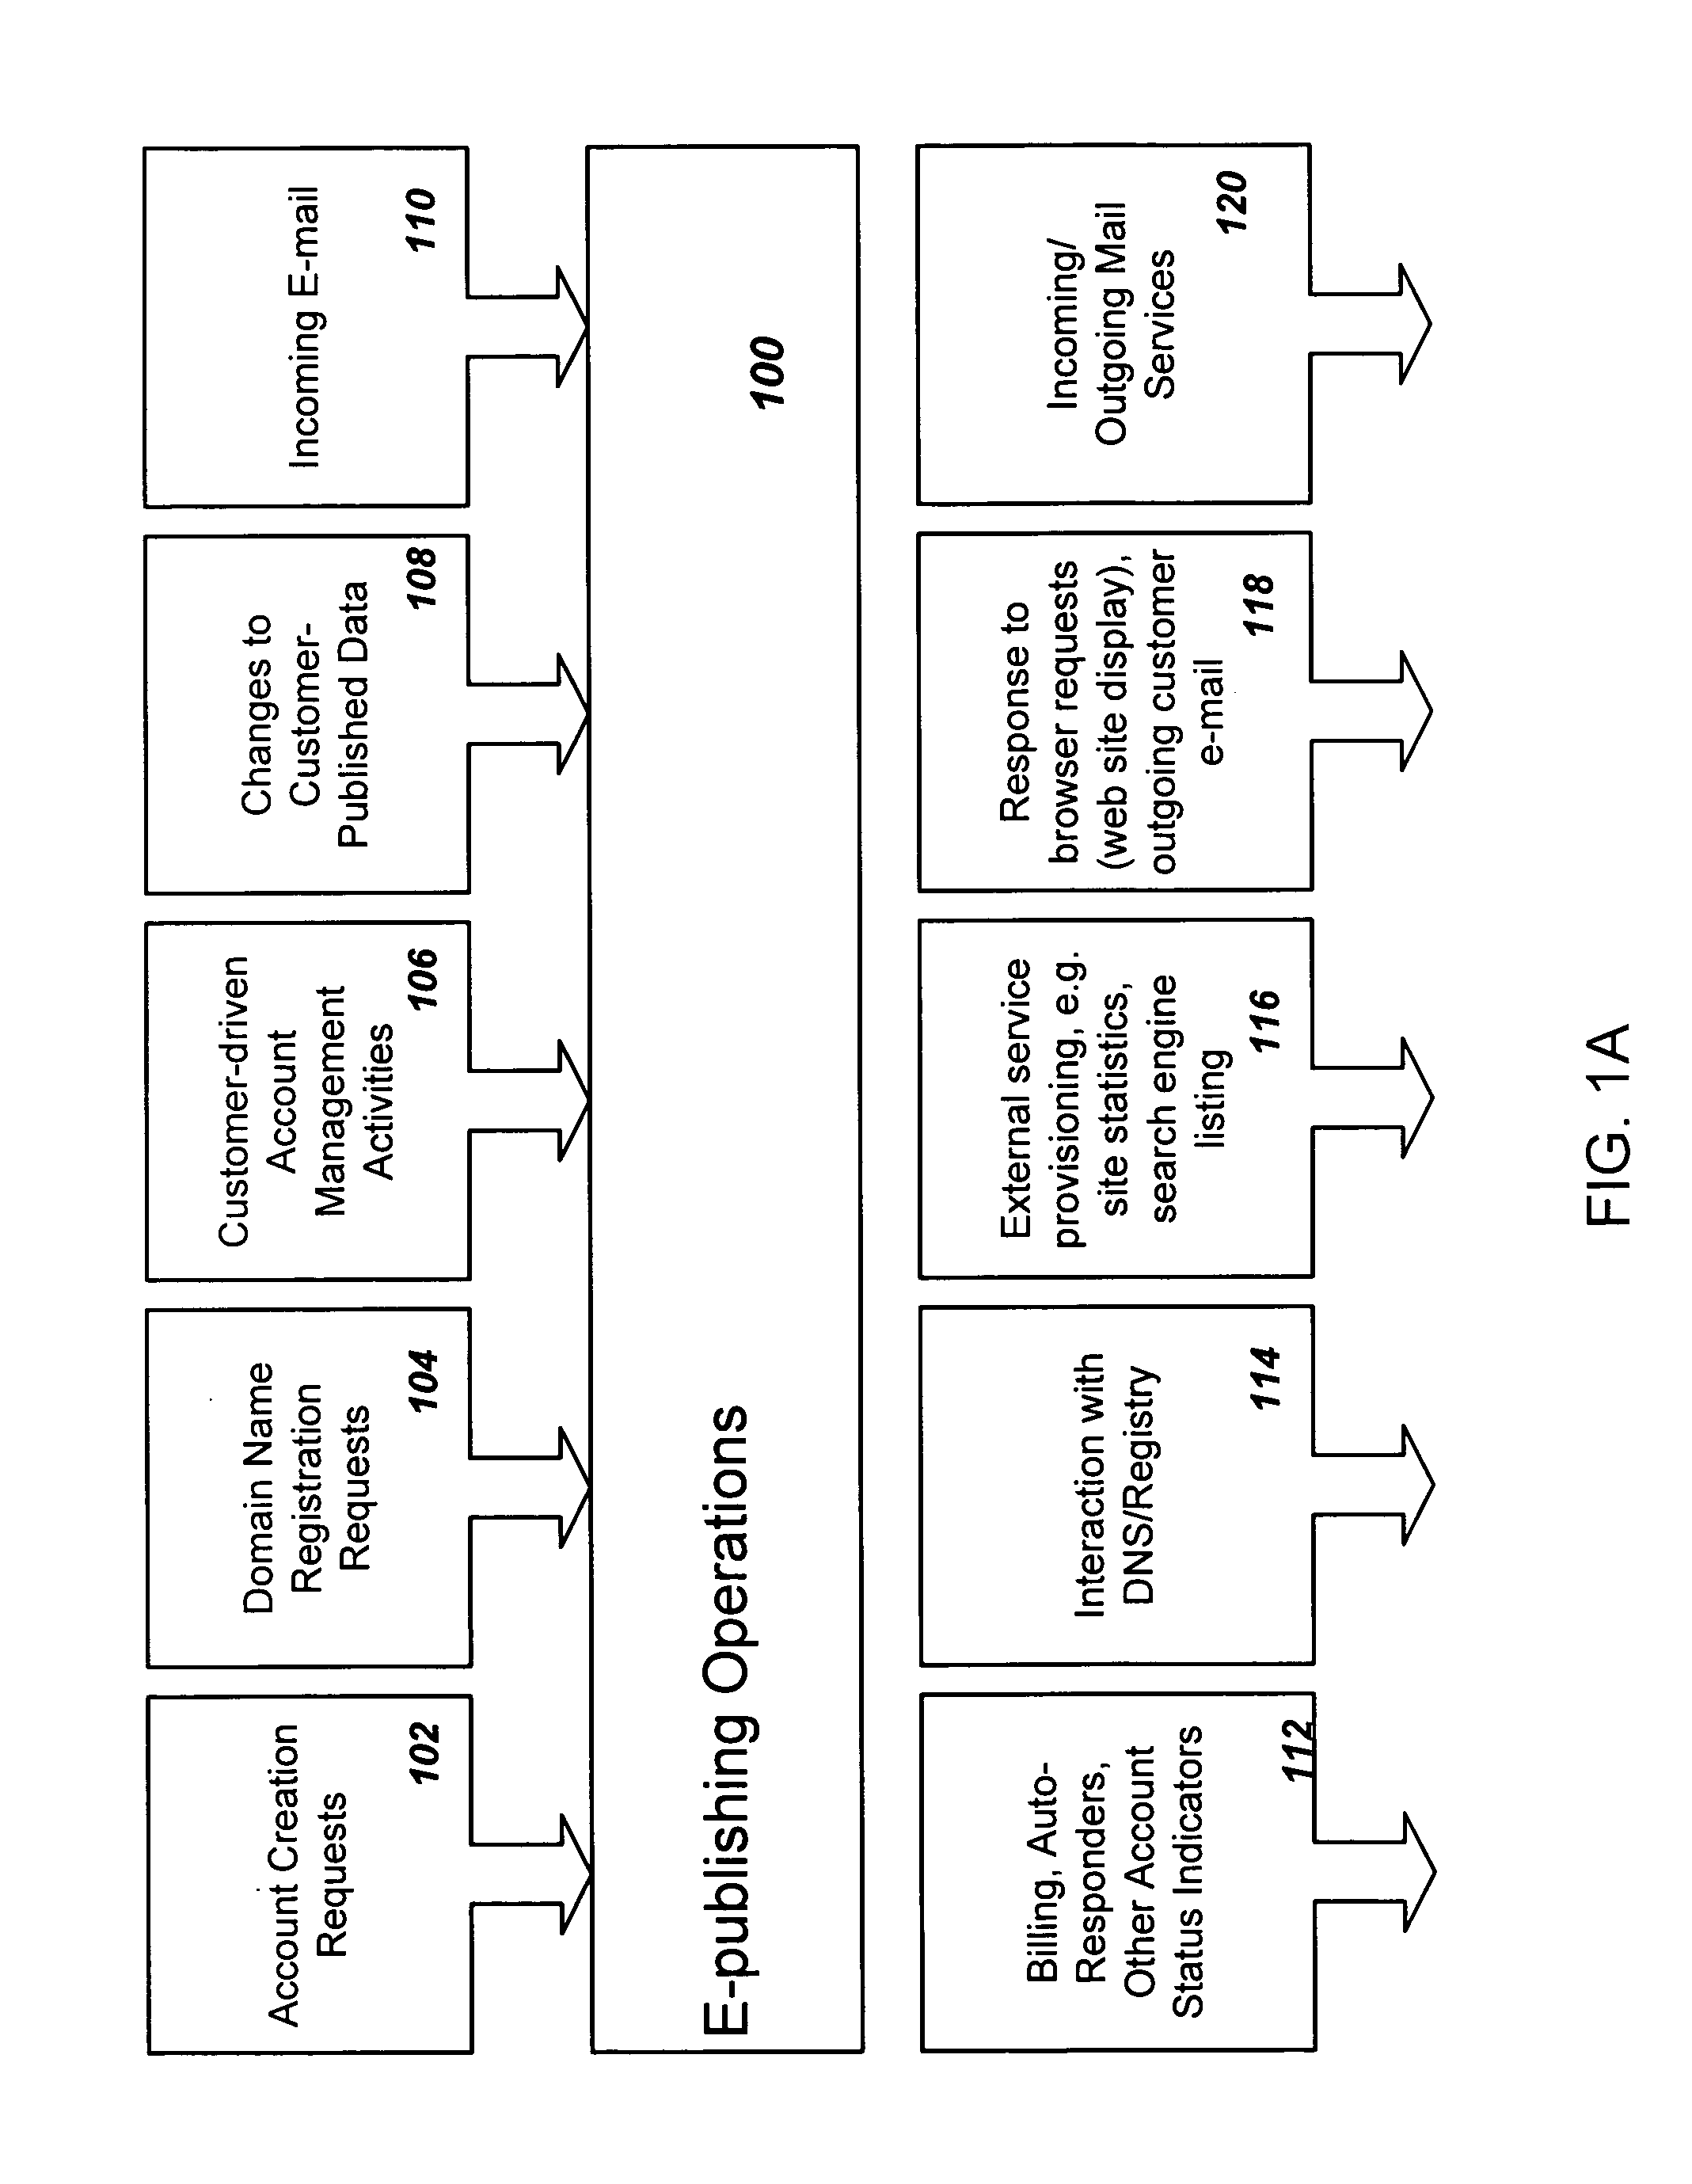 System and method for automatic domain-name registration and web publishing